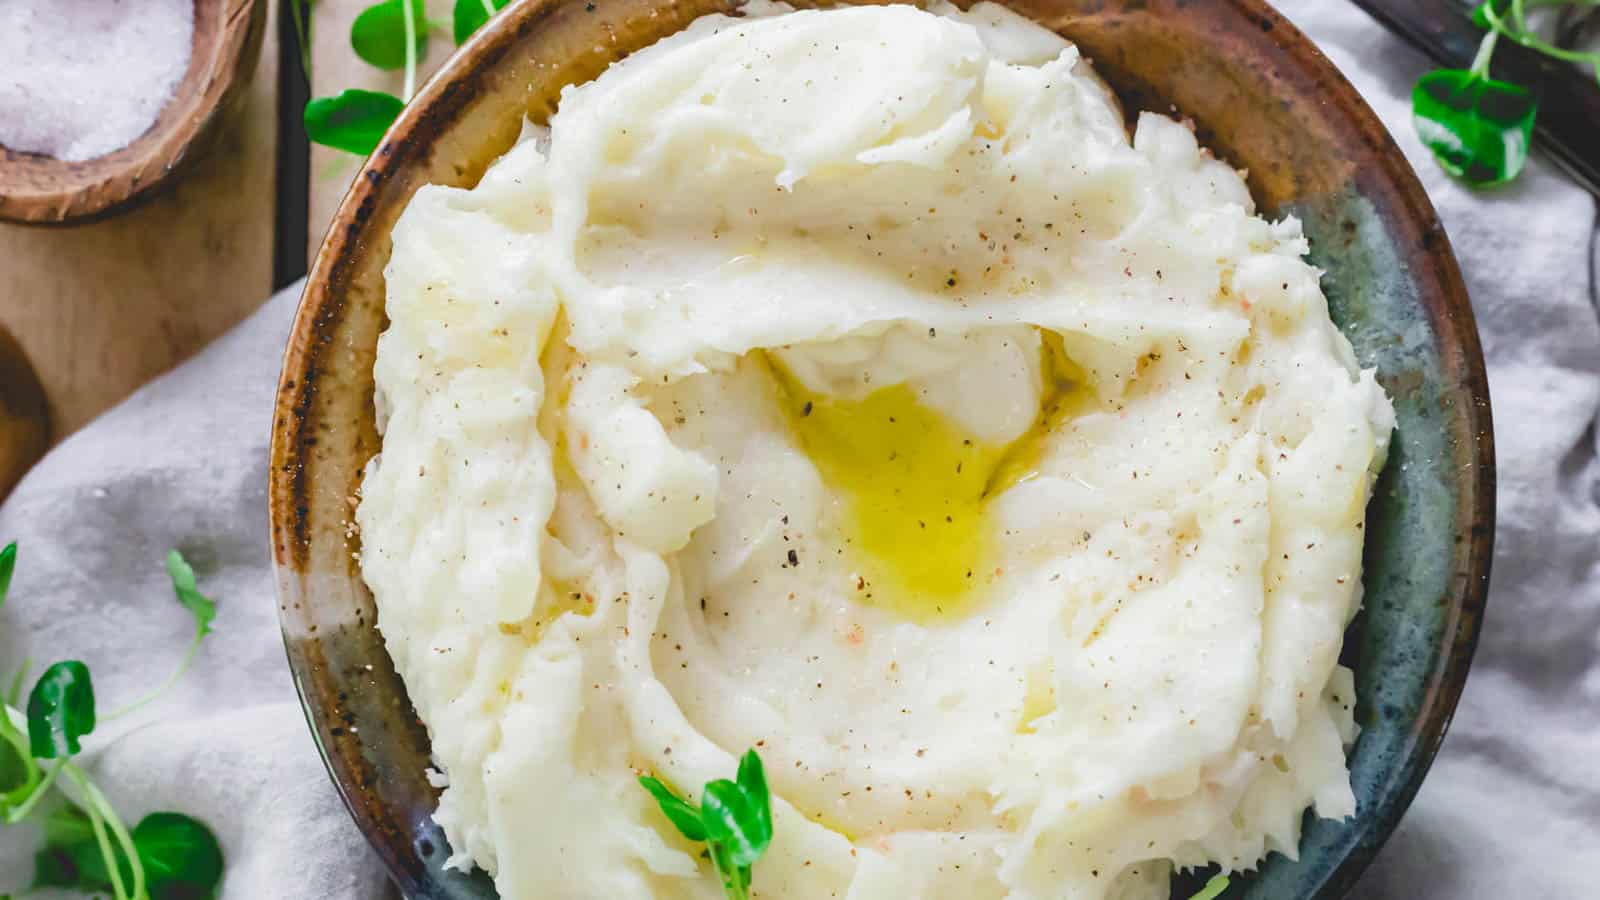 Creamy mashed yuca with melted ghee.